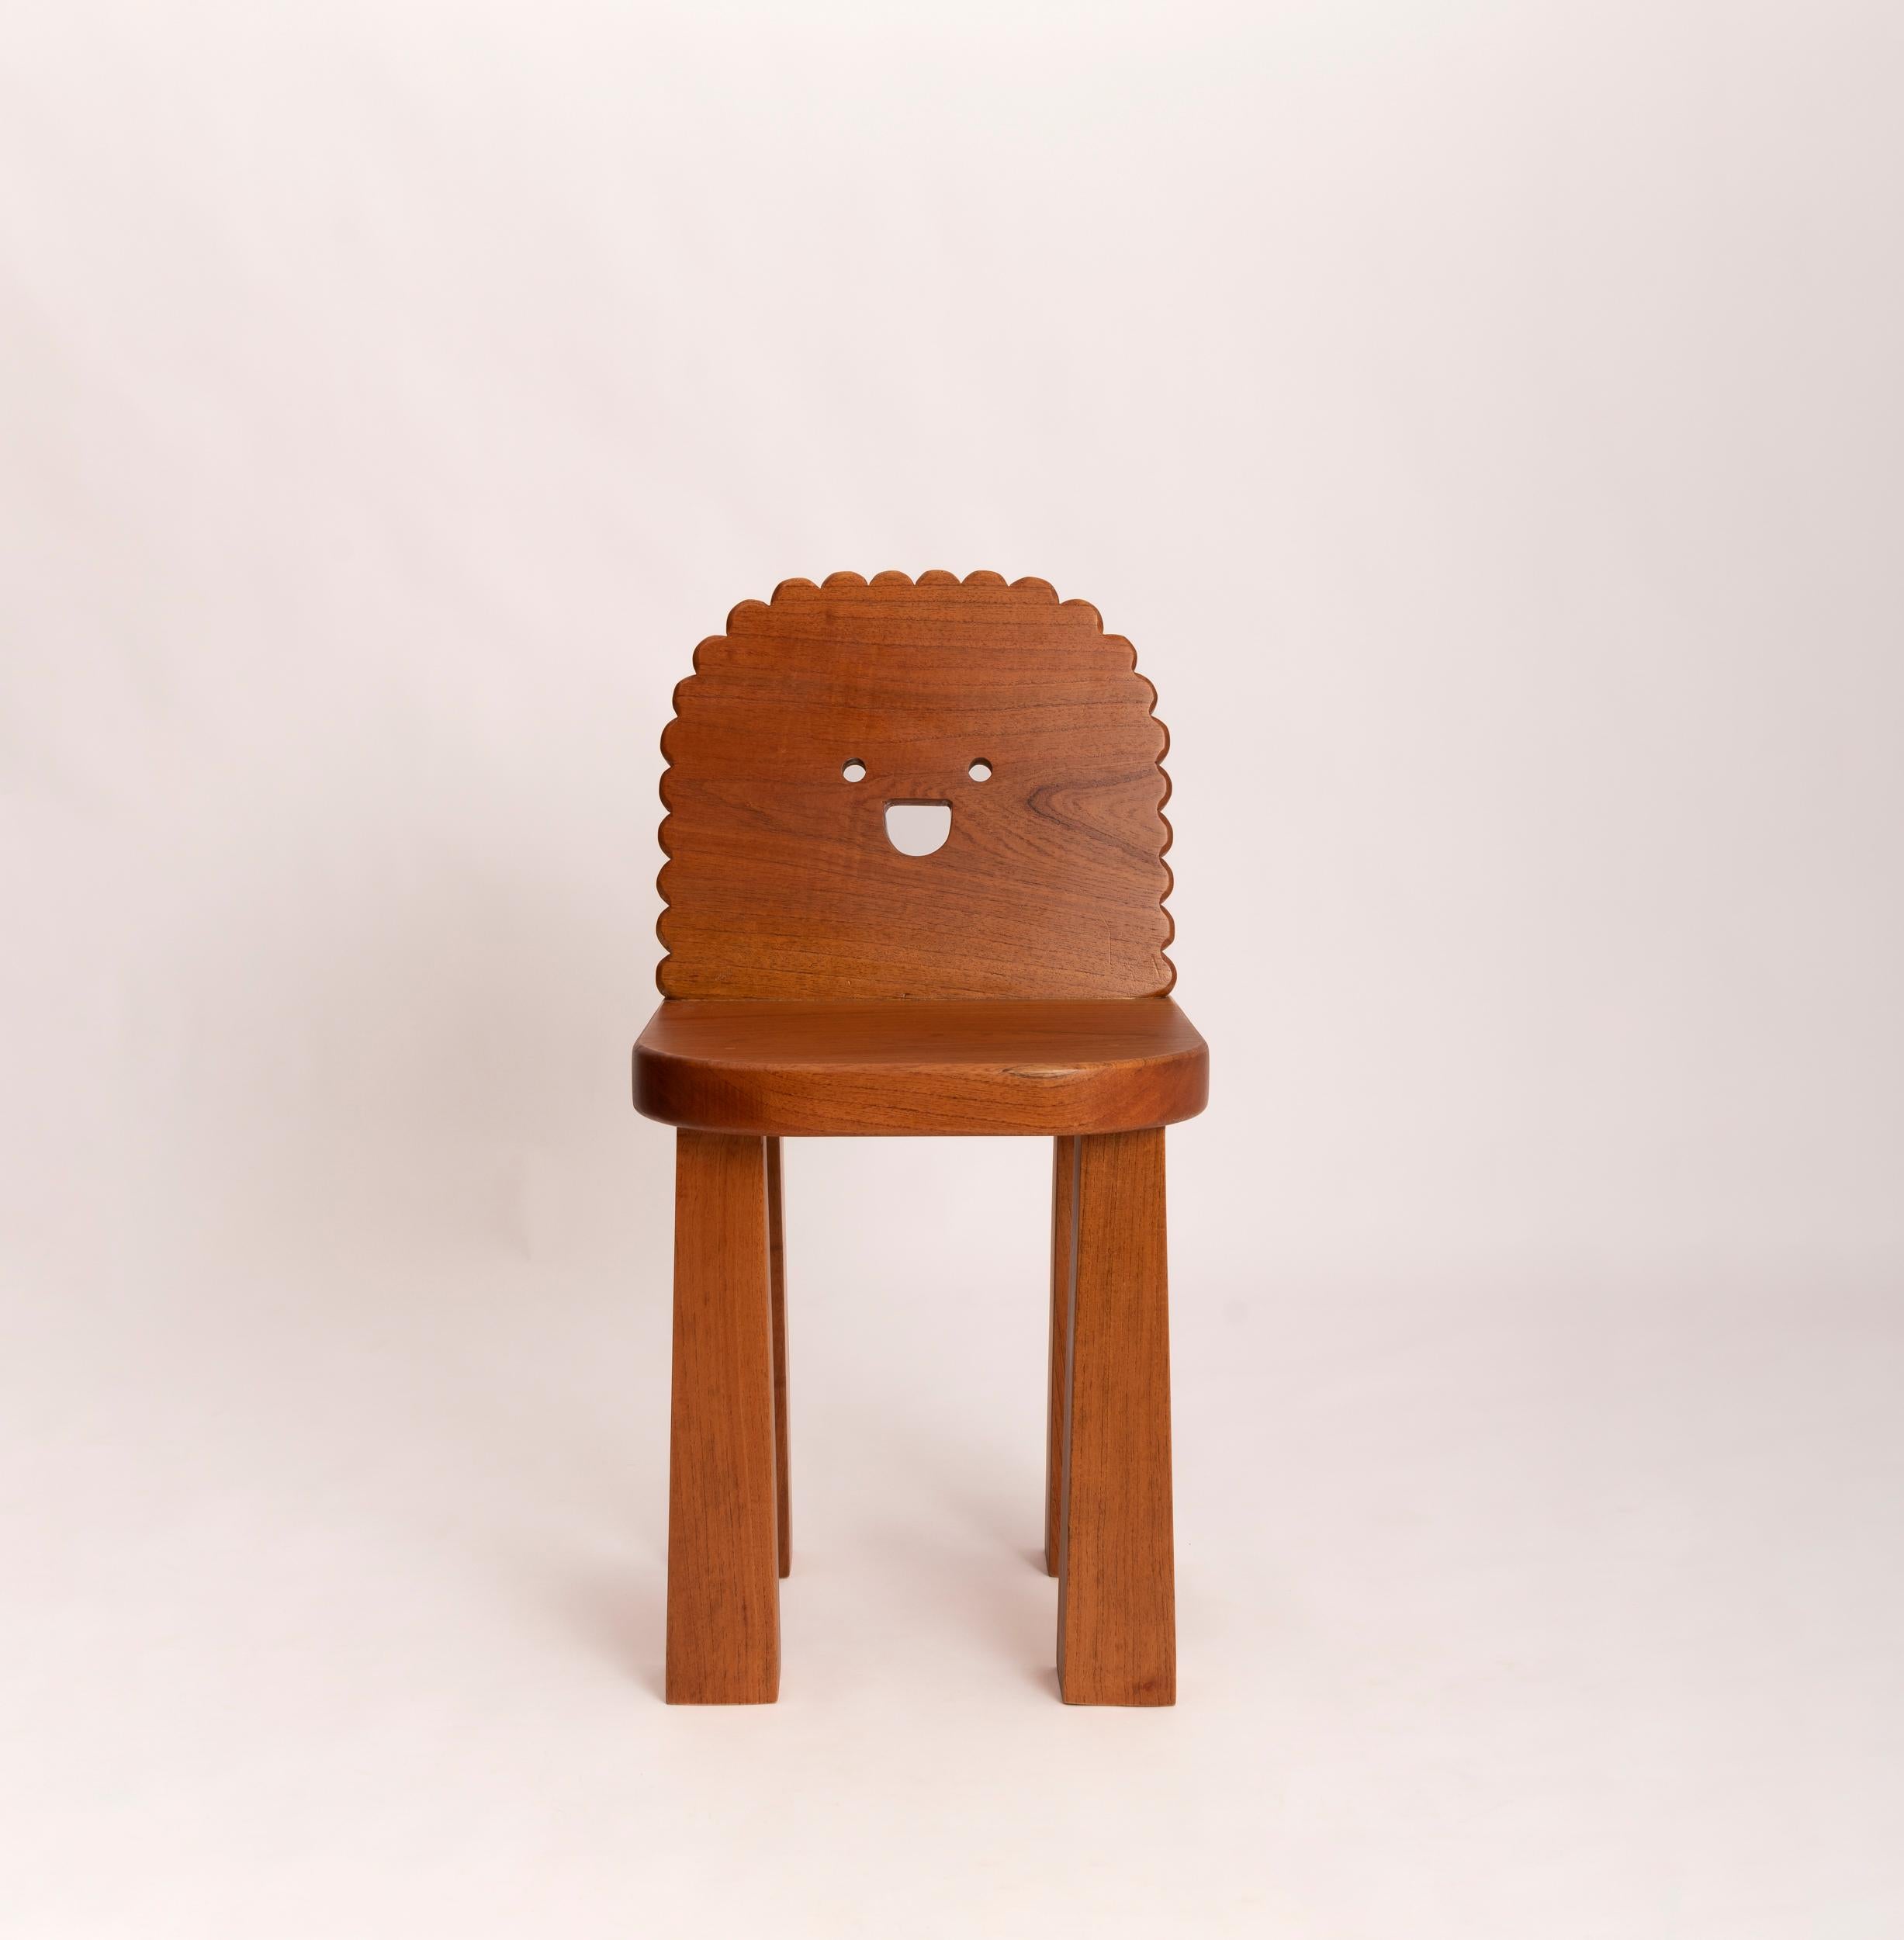 “Silla Sol”
Silla Sol chair is not just a chair but a Mexican cookie-inspired chair, a happy face object that livens up any space it enters. You can sit on it, you can place your favorite books on it, your favorite plant, etc. Whoever enters the